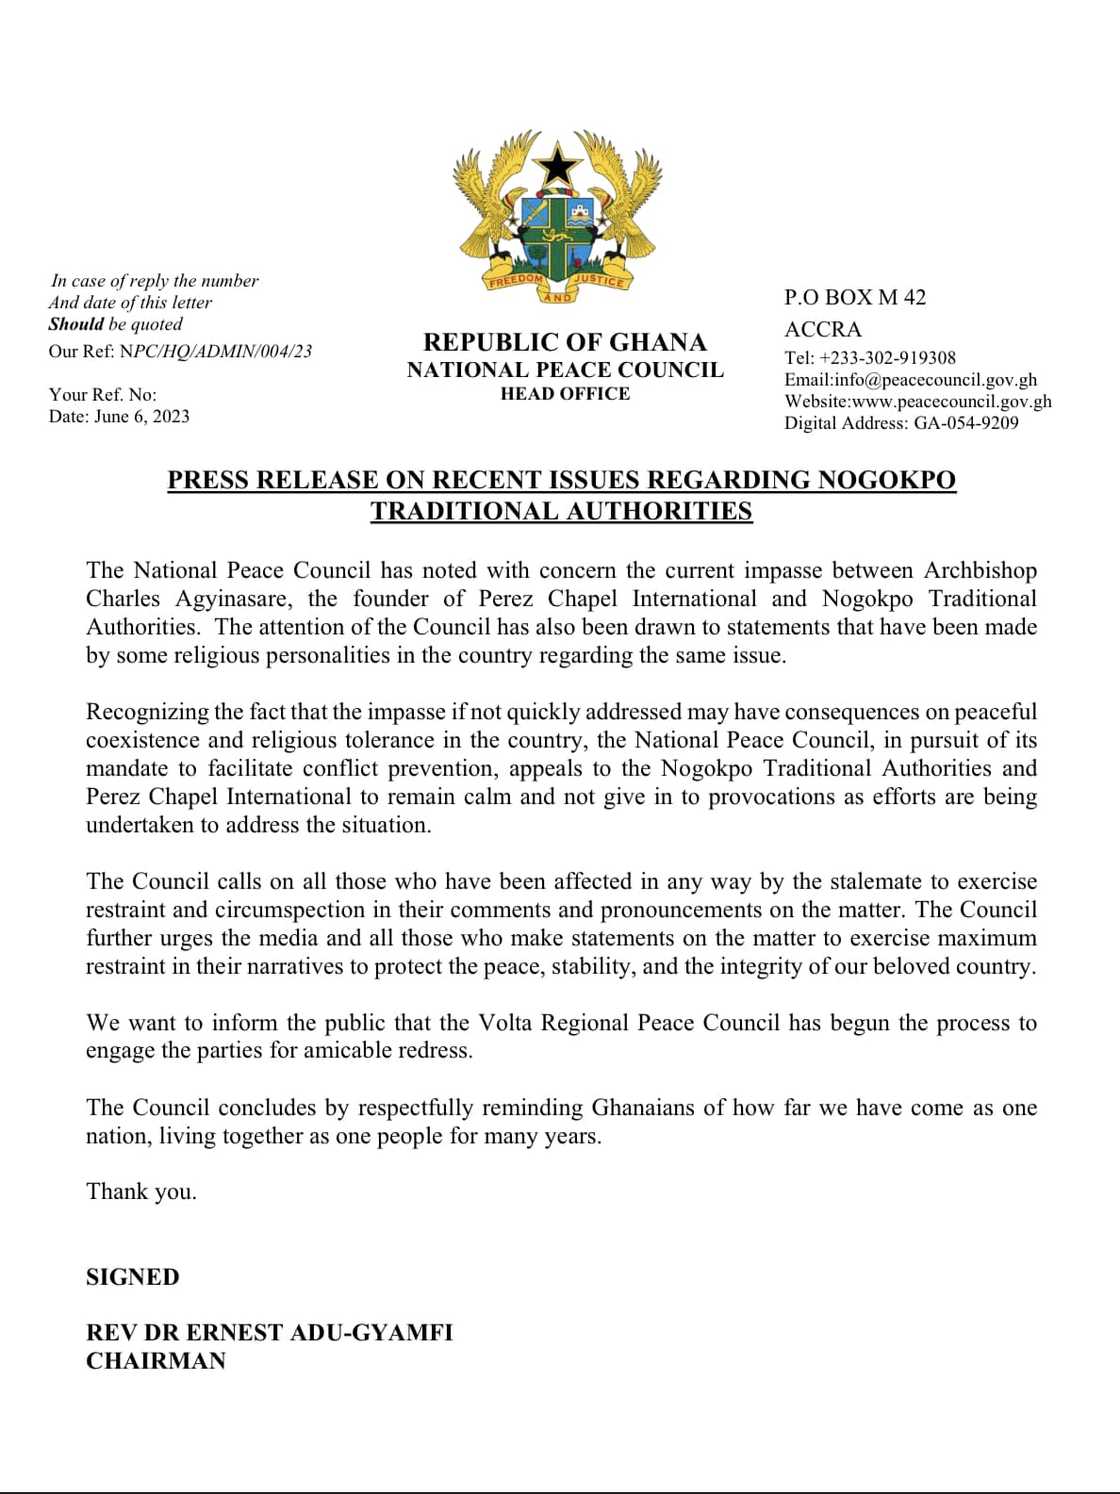 National Peace Council is urging peace in the Nogokpo saga.